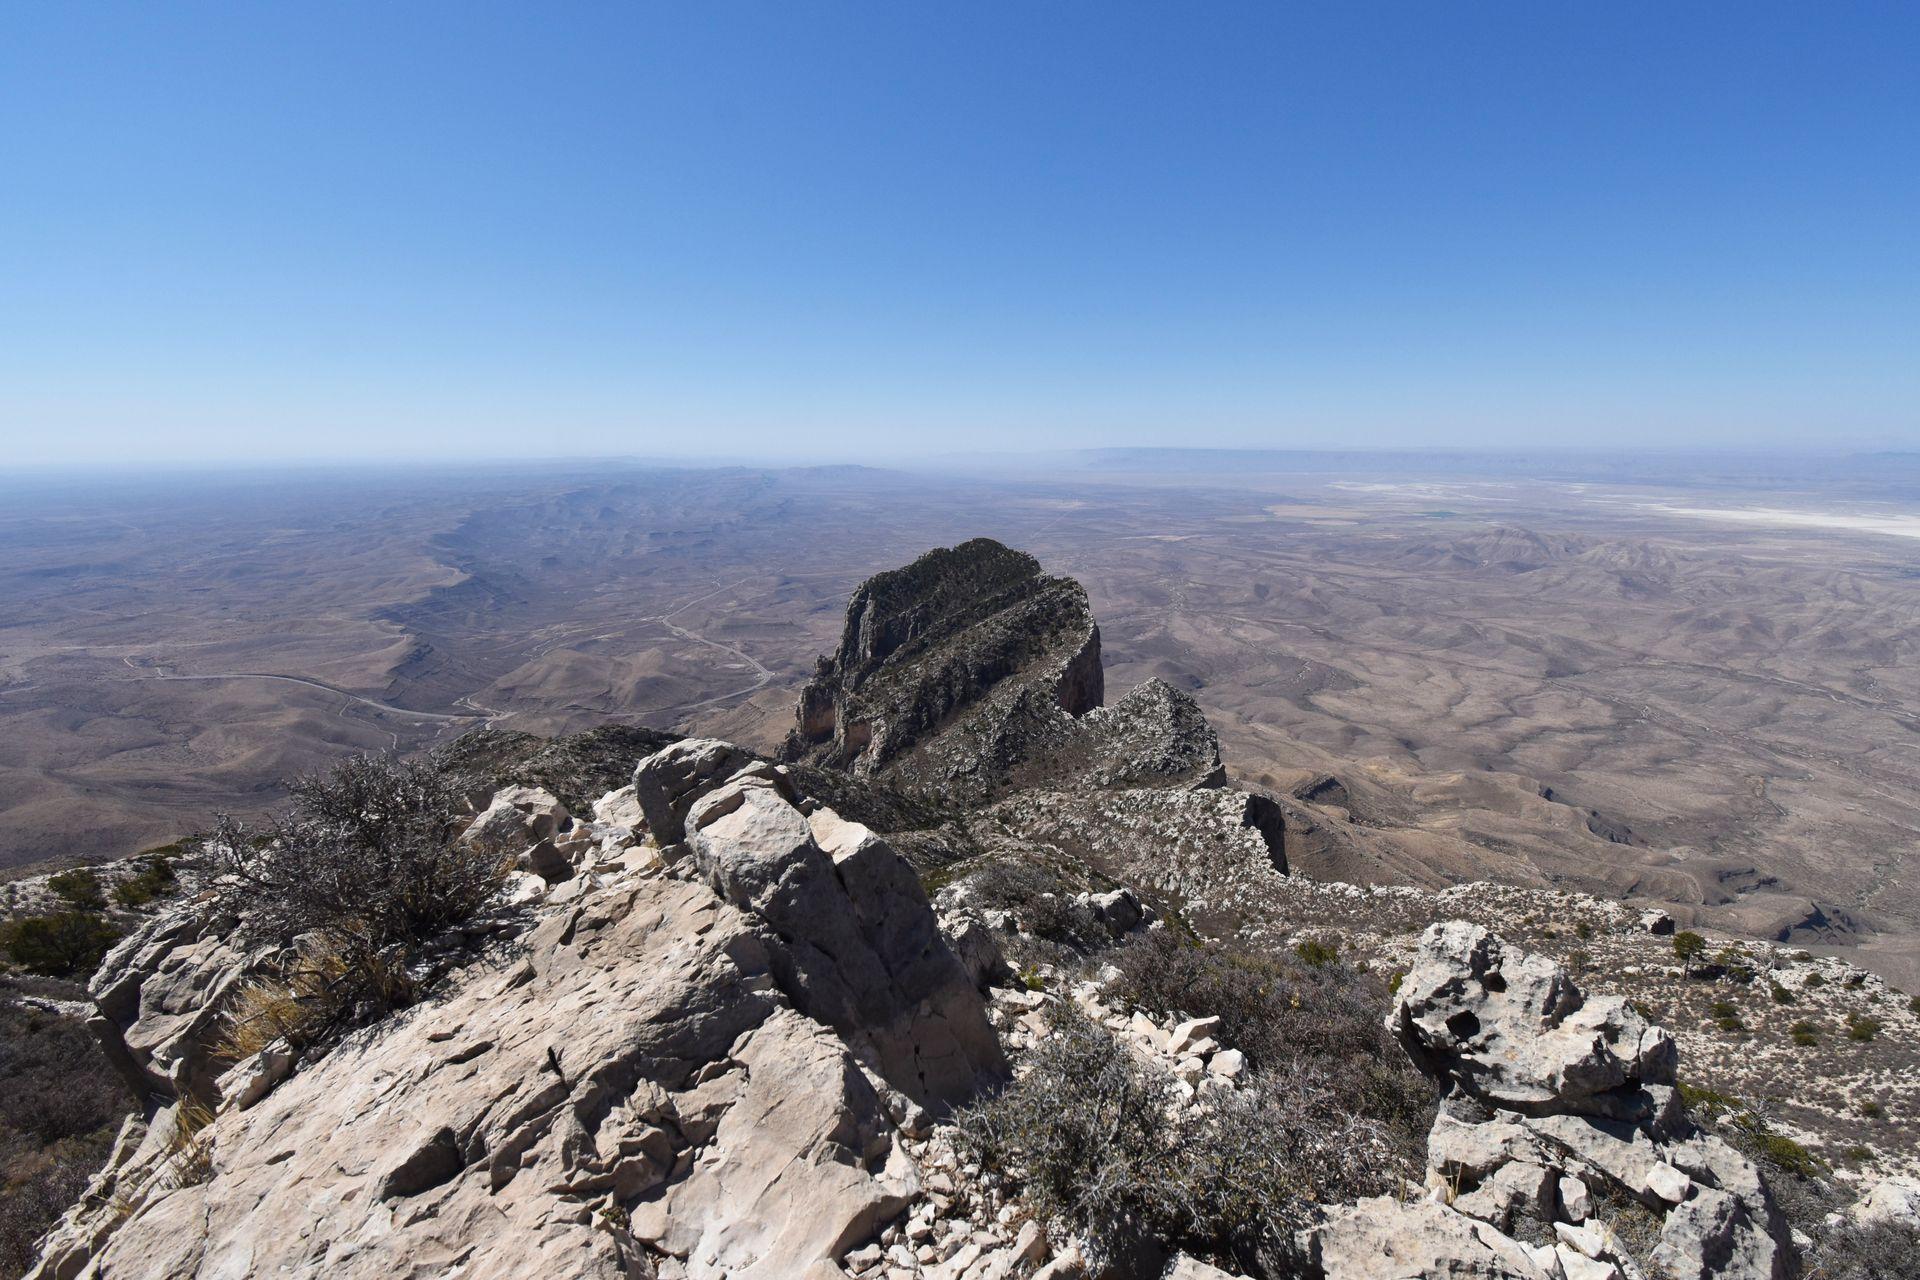 The view from the top of Guadalupe Mountain, the tallest peak in Texas